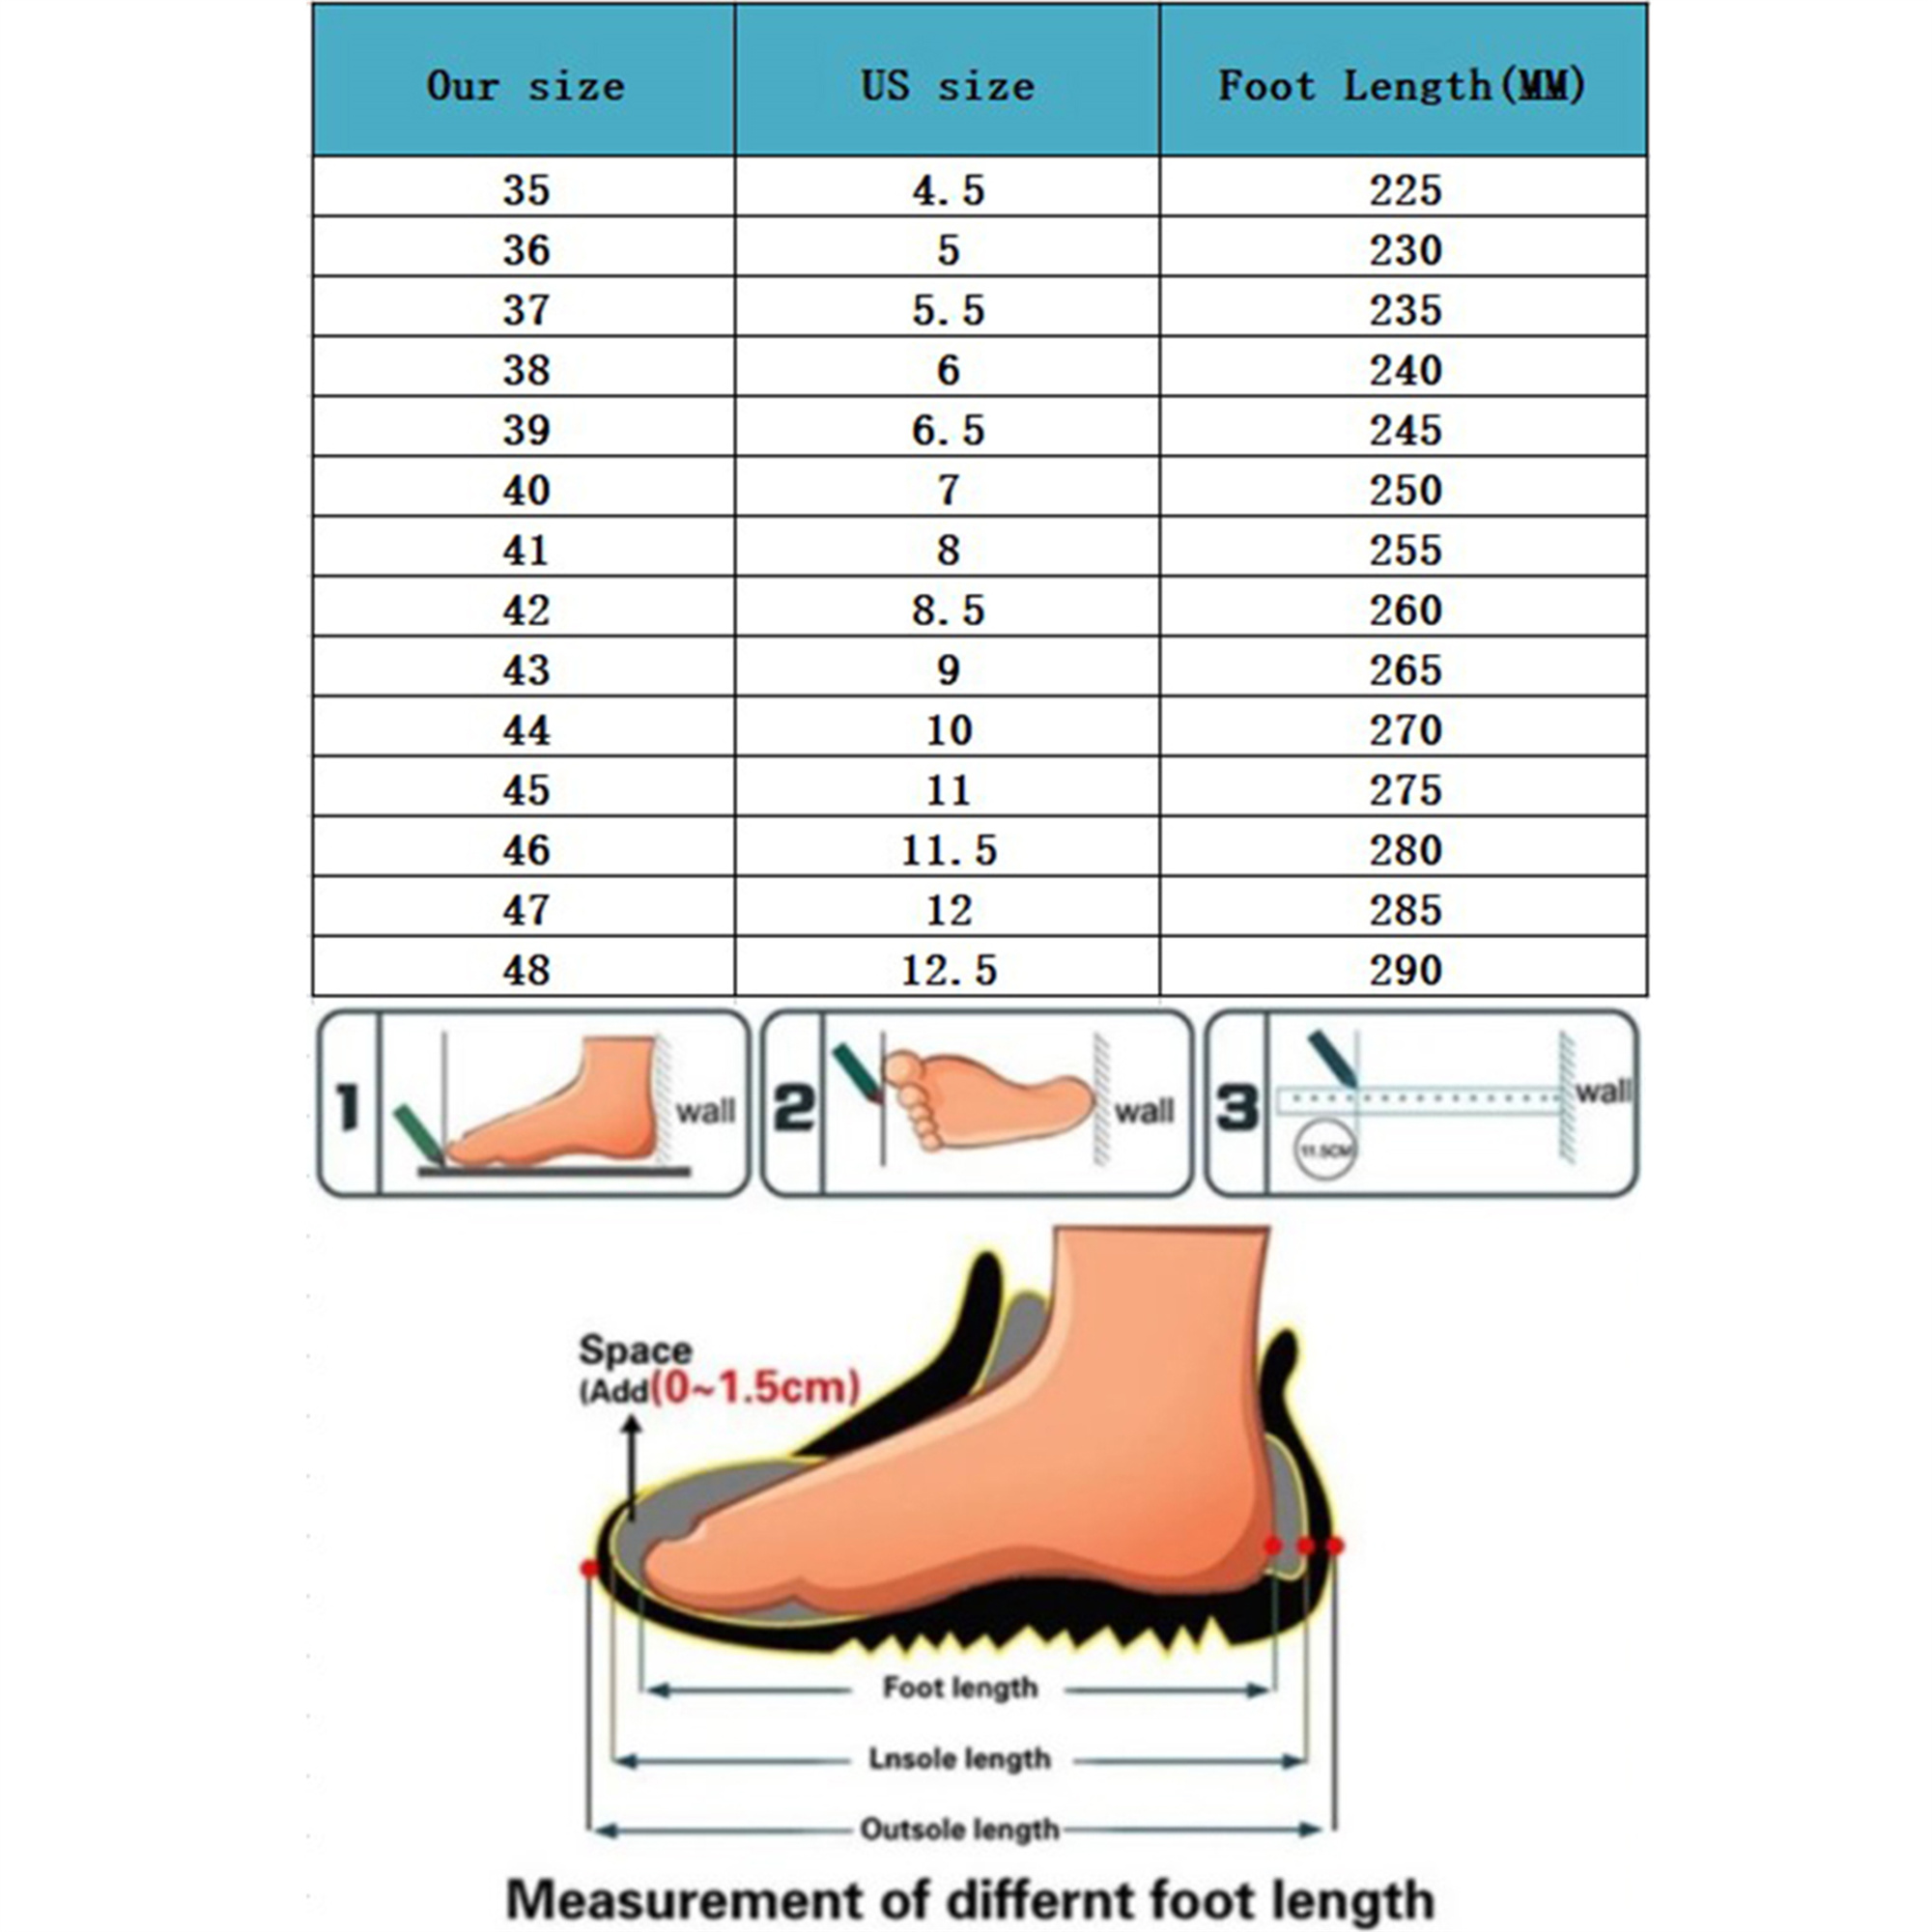 Damyuan Fashion Sneakers Mens Running Shoes Casual Walking Shoes Athletic Sport Lightweight Breathable Mesh Comfortable Sole - image 5 of 10